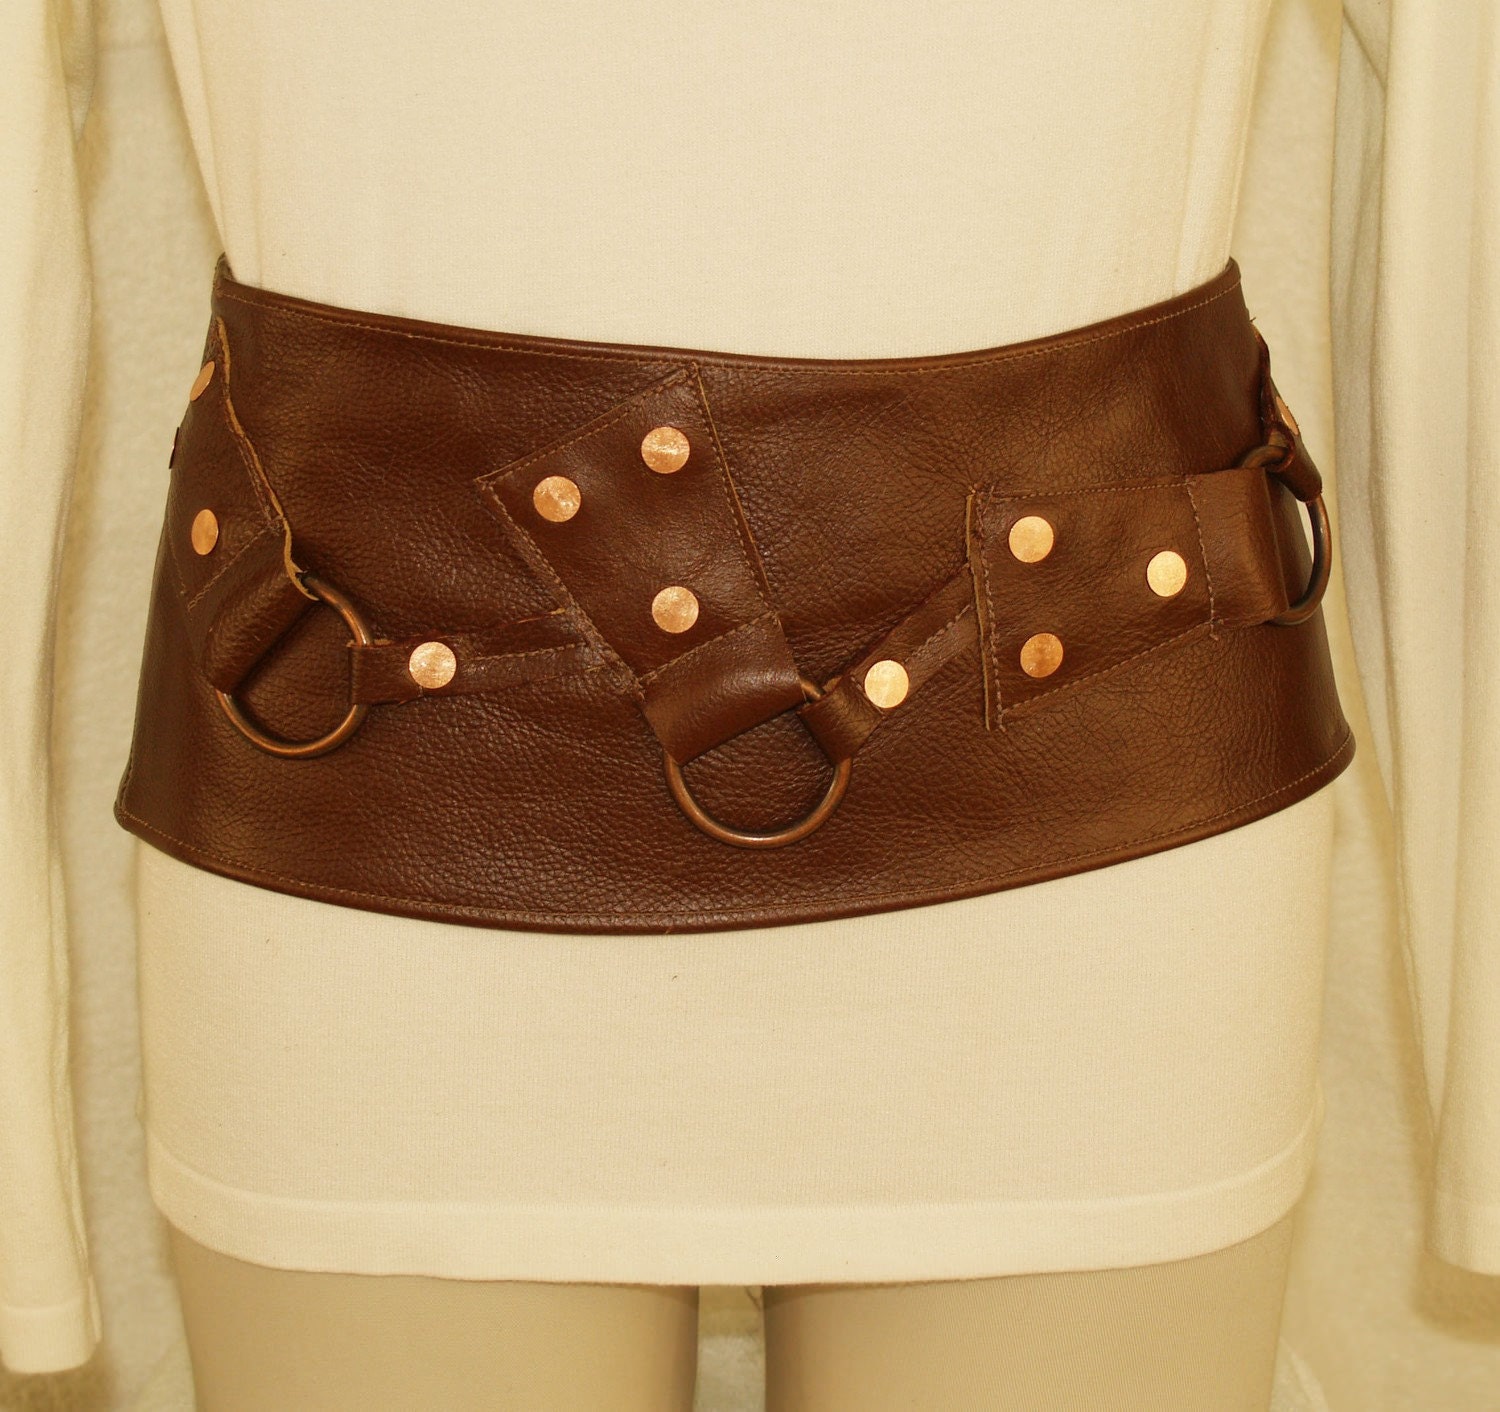 Beautiful Brown Leather Belt With Copper Accents - Etsy